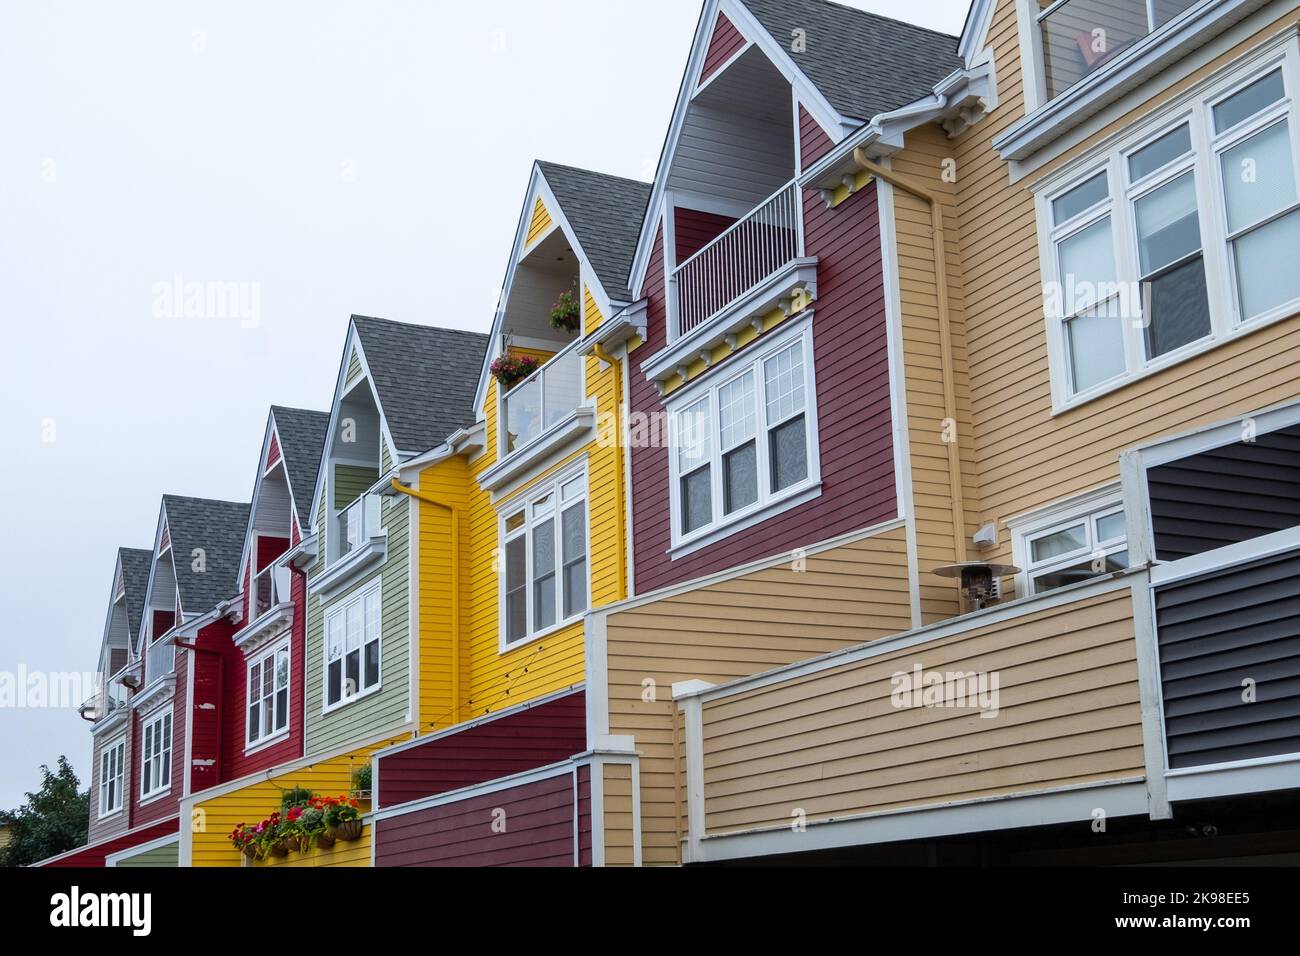 Street View of multiple colorful row houses in downtown St. John's. The buildings have peeked roofs, small windows, wood siding, and multiple layers. Stock Photo